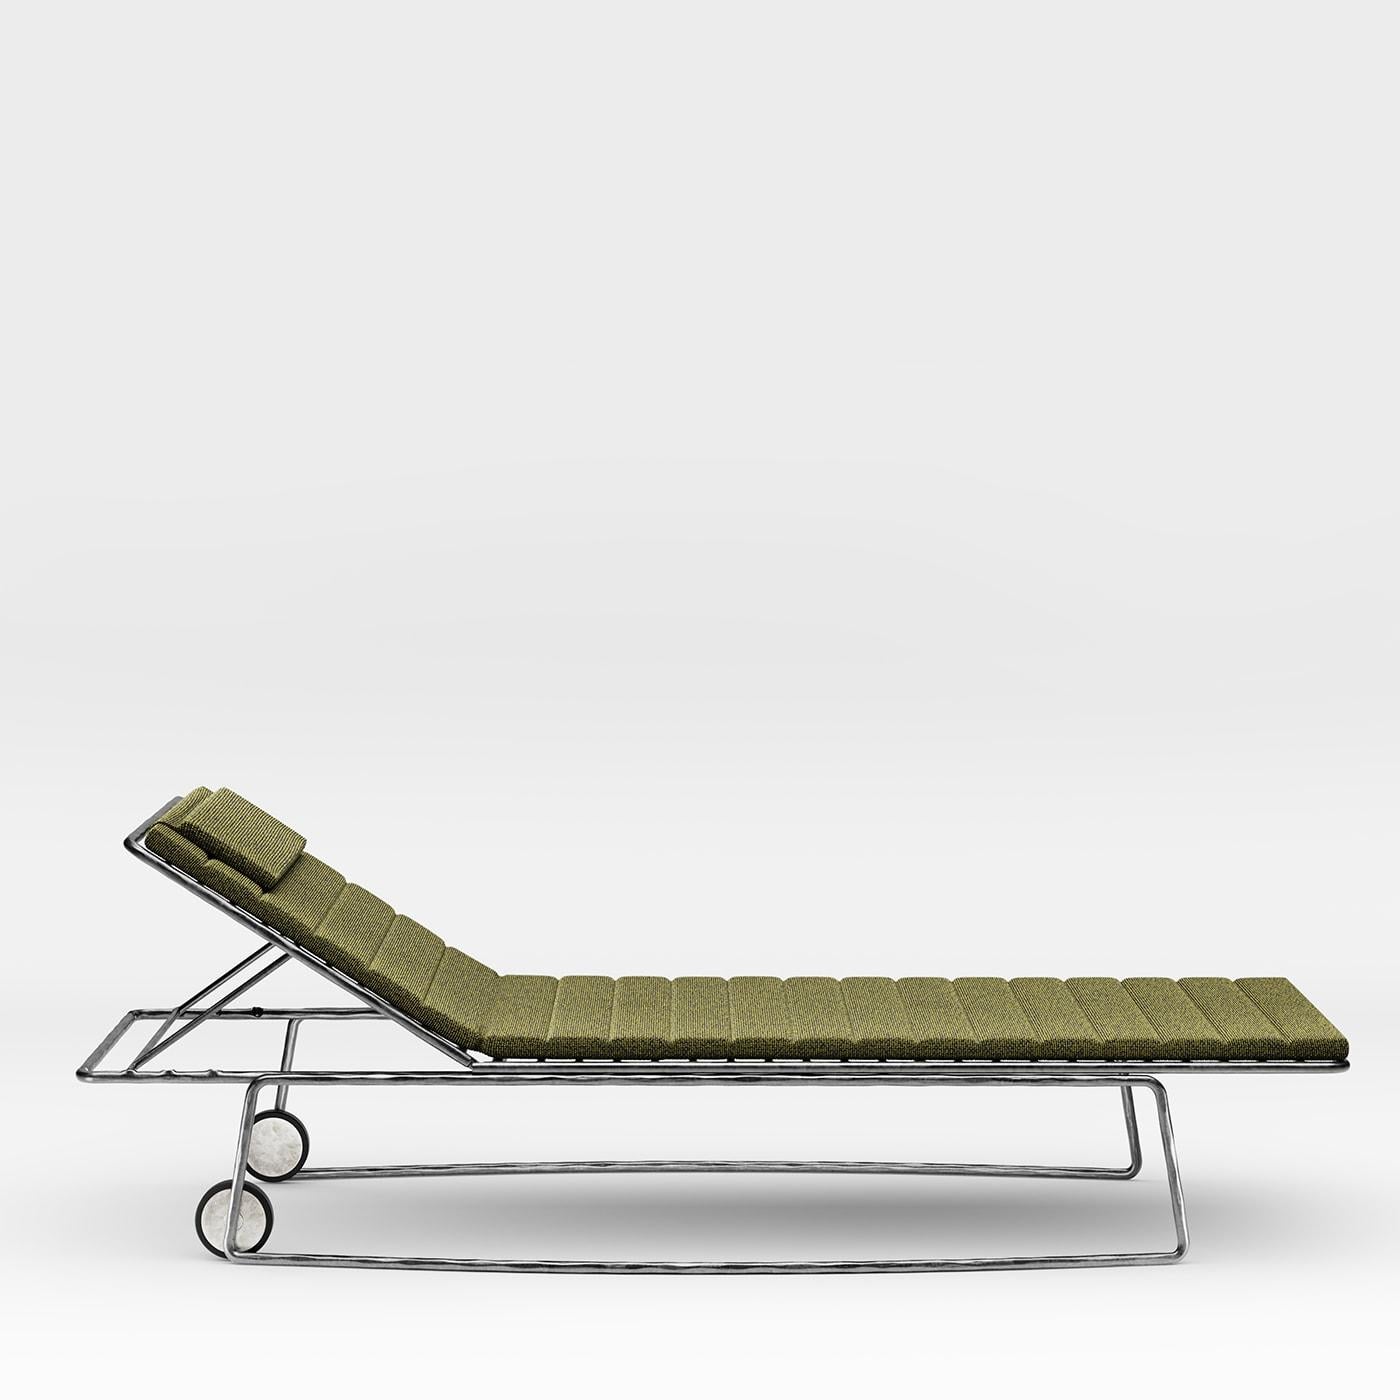 A gorgeous design to display by a poolside or in a blooming garden, this sun bed combines the clean aesthetic of Stormo Studio and the expertise of Dante Negro metalworkers. Handmade of lacquered stainless steel, it is completed with a green